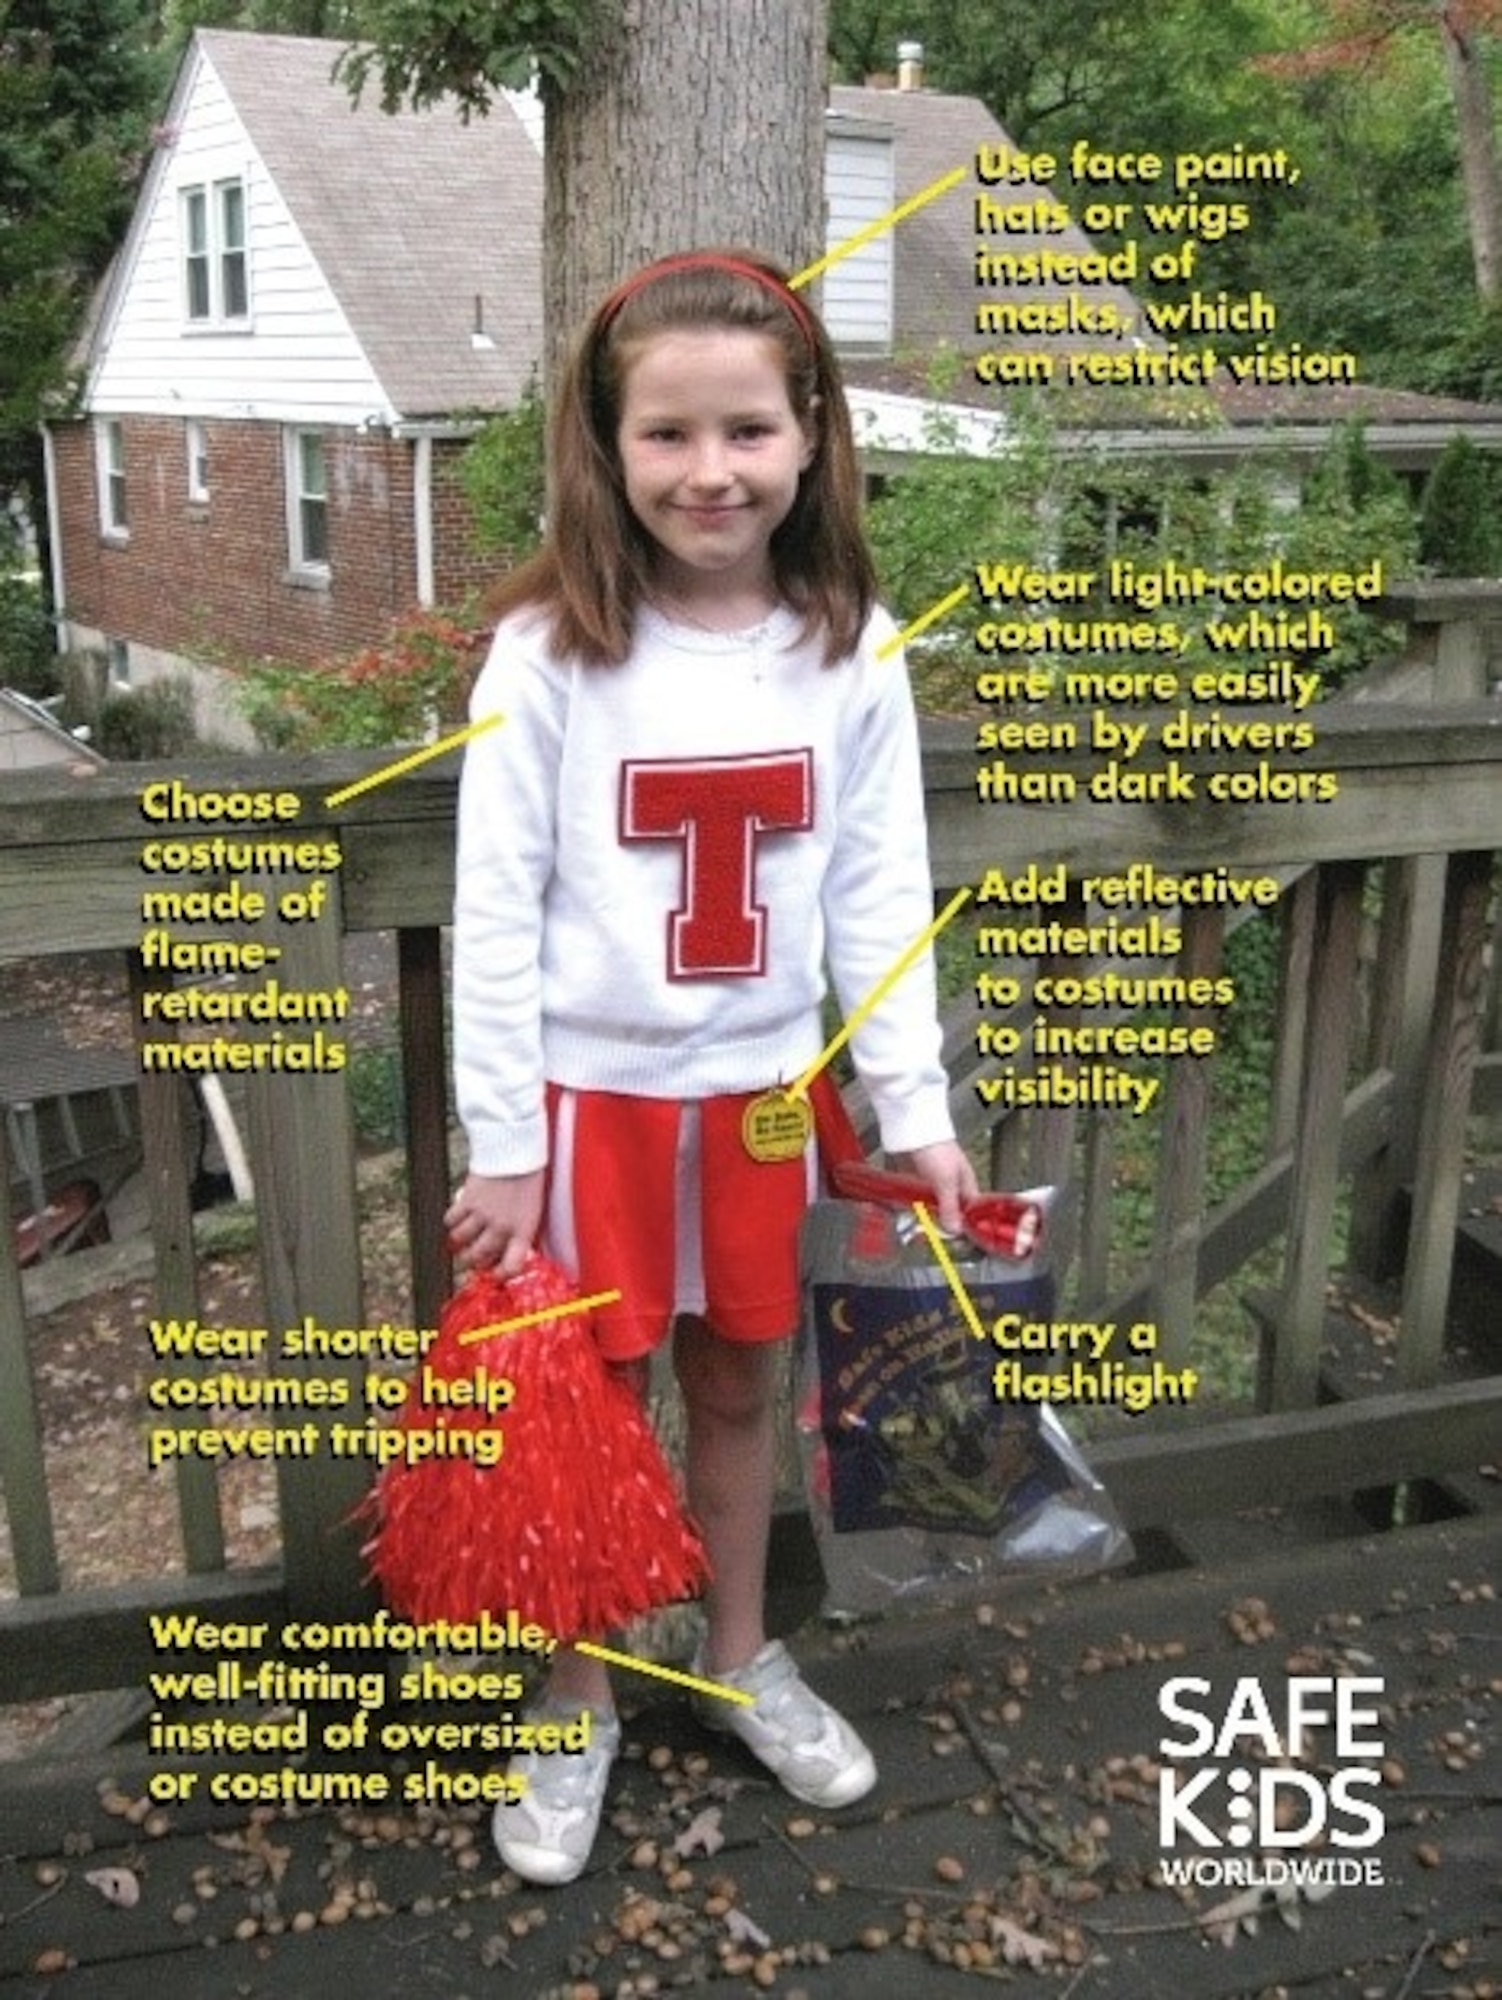 This costume is an example of a safe costume for kids to wear on Halloween, because it meets all safety requirements. (Photo courtesy of Safekids Worldwide)